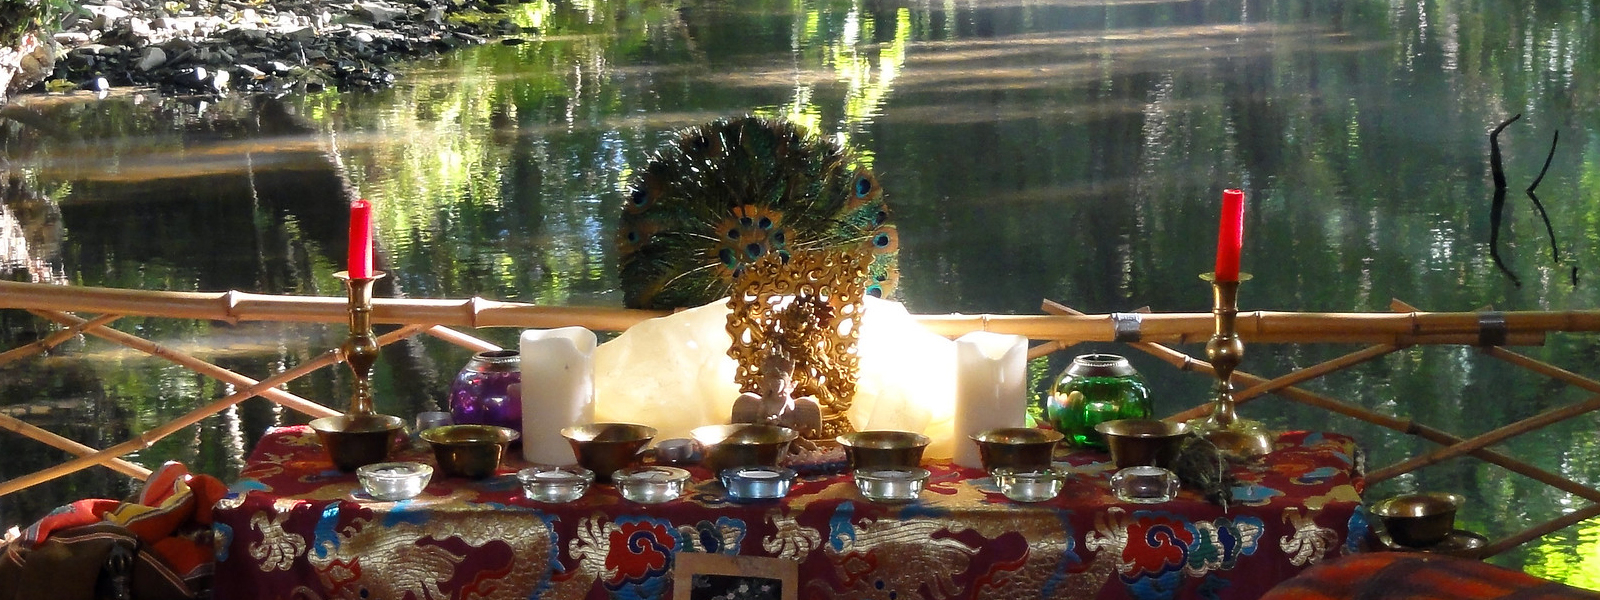 Buddhist shrine over a river with a feather fan, candles and light reflecting off the water